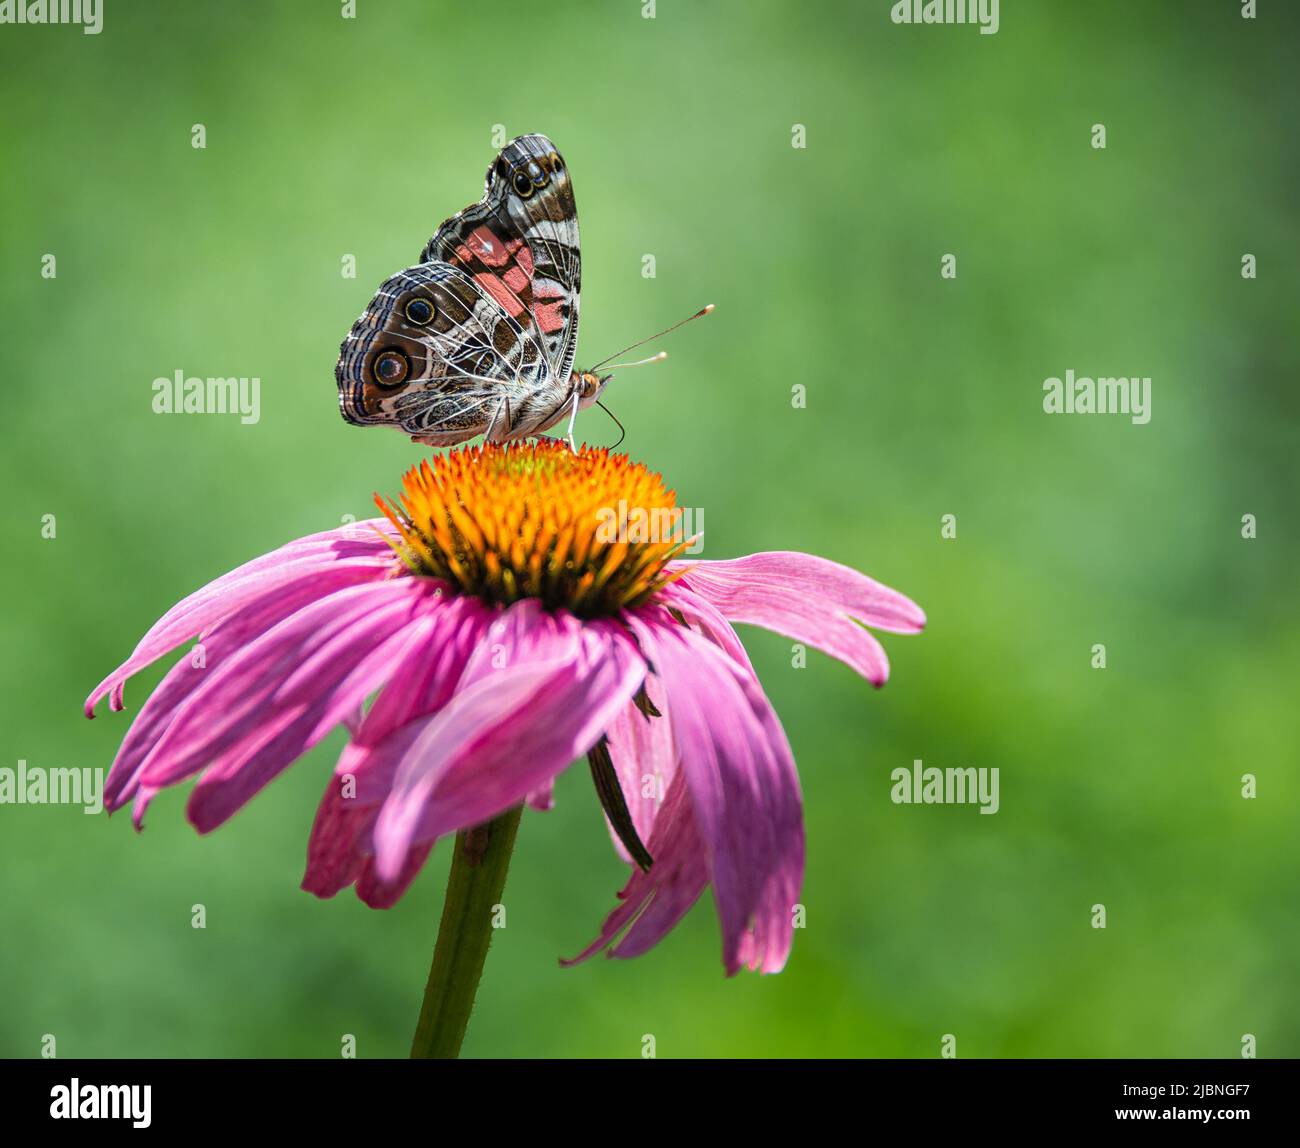 American Lady butterfly (Vanessa virginiensis) feeding on purple coneflower. Natural green background with copy space. Stock Photo